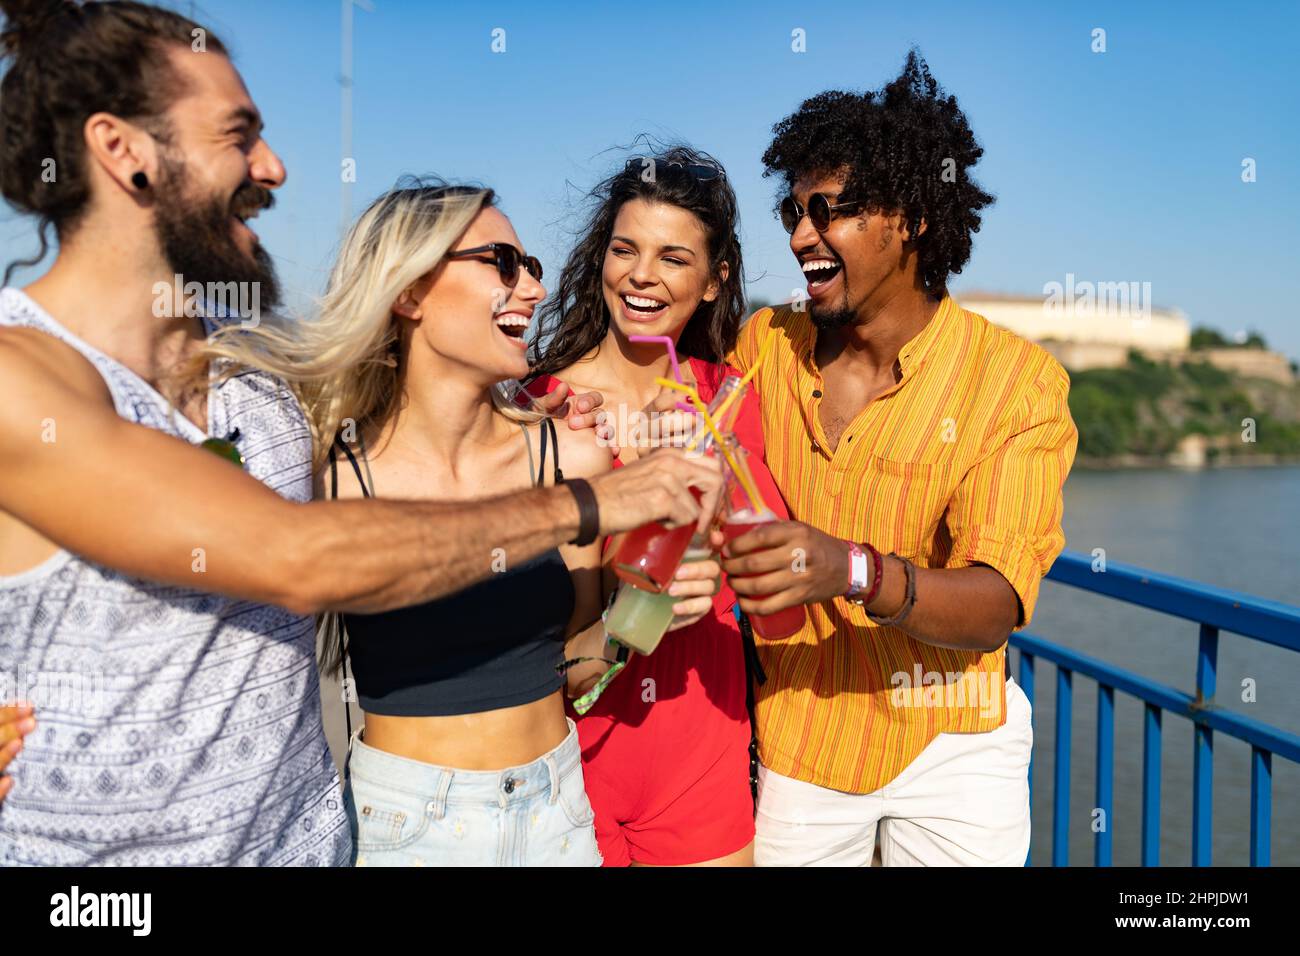 Group of happy friends hanging out and enjoying drinks, festival Stock Photo